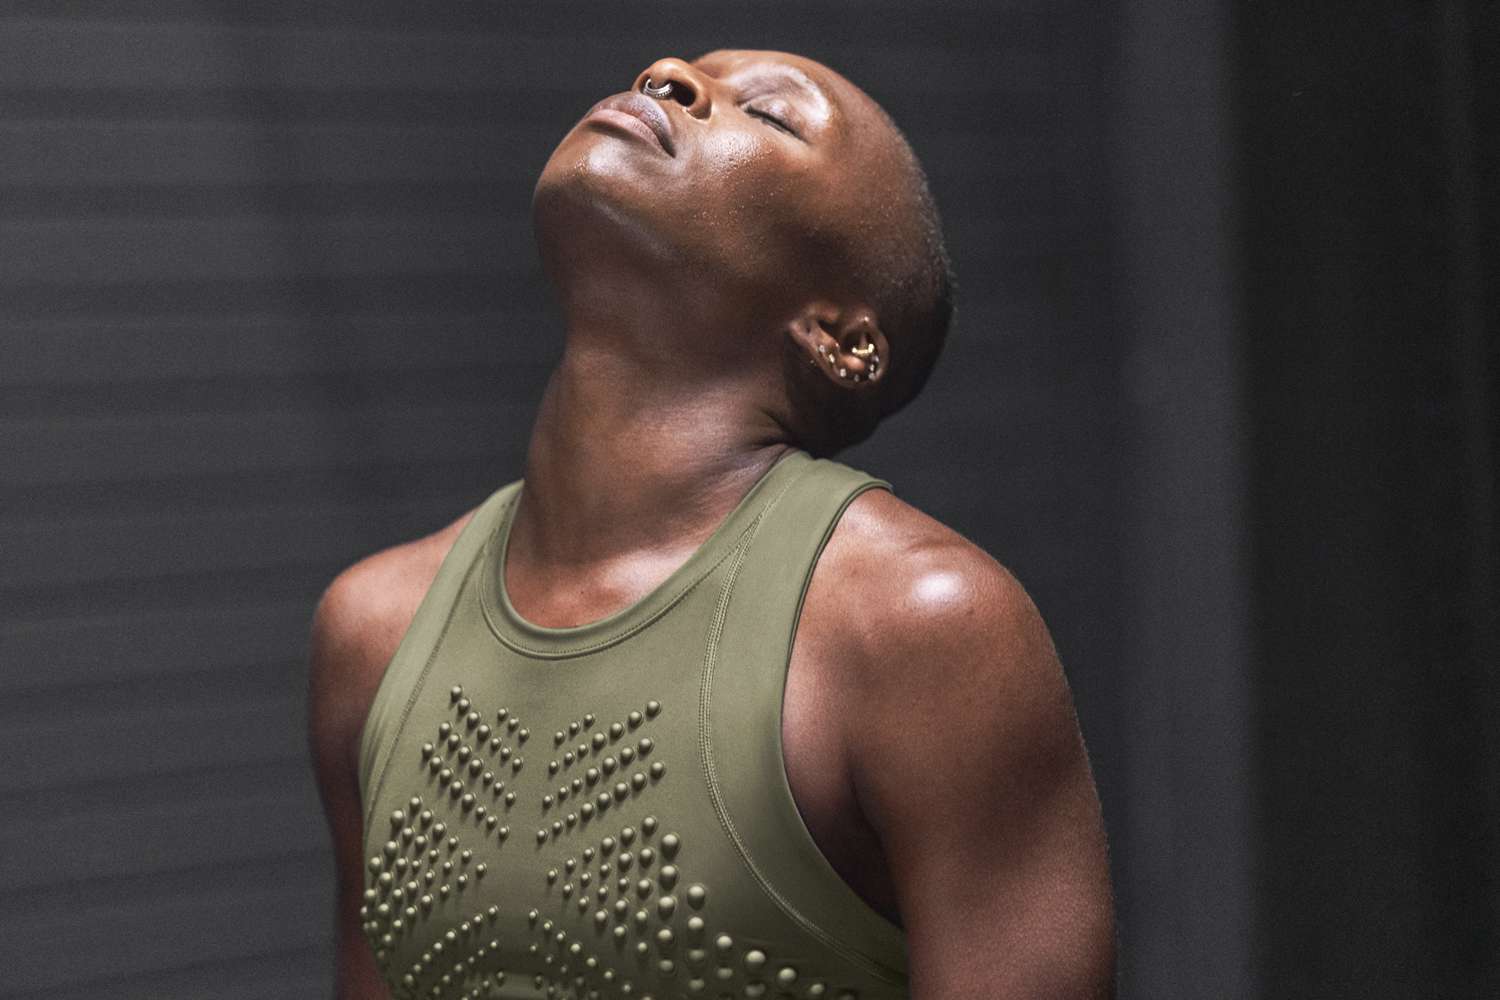 Cynthia Erivo launched fitness company, shares her journey